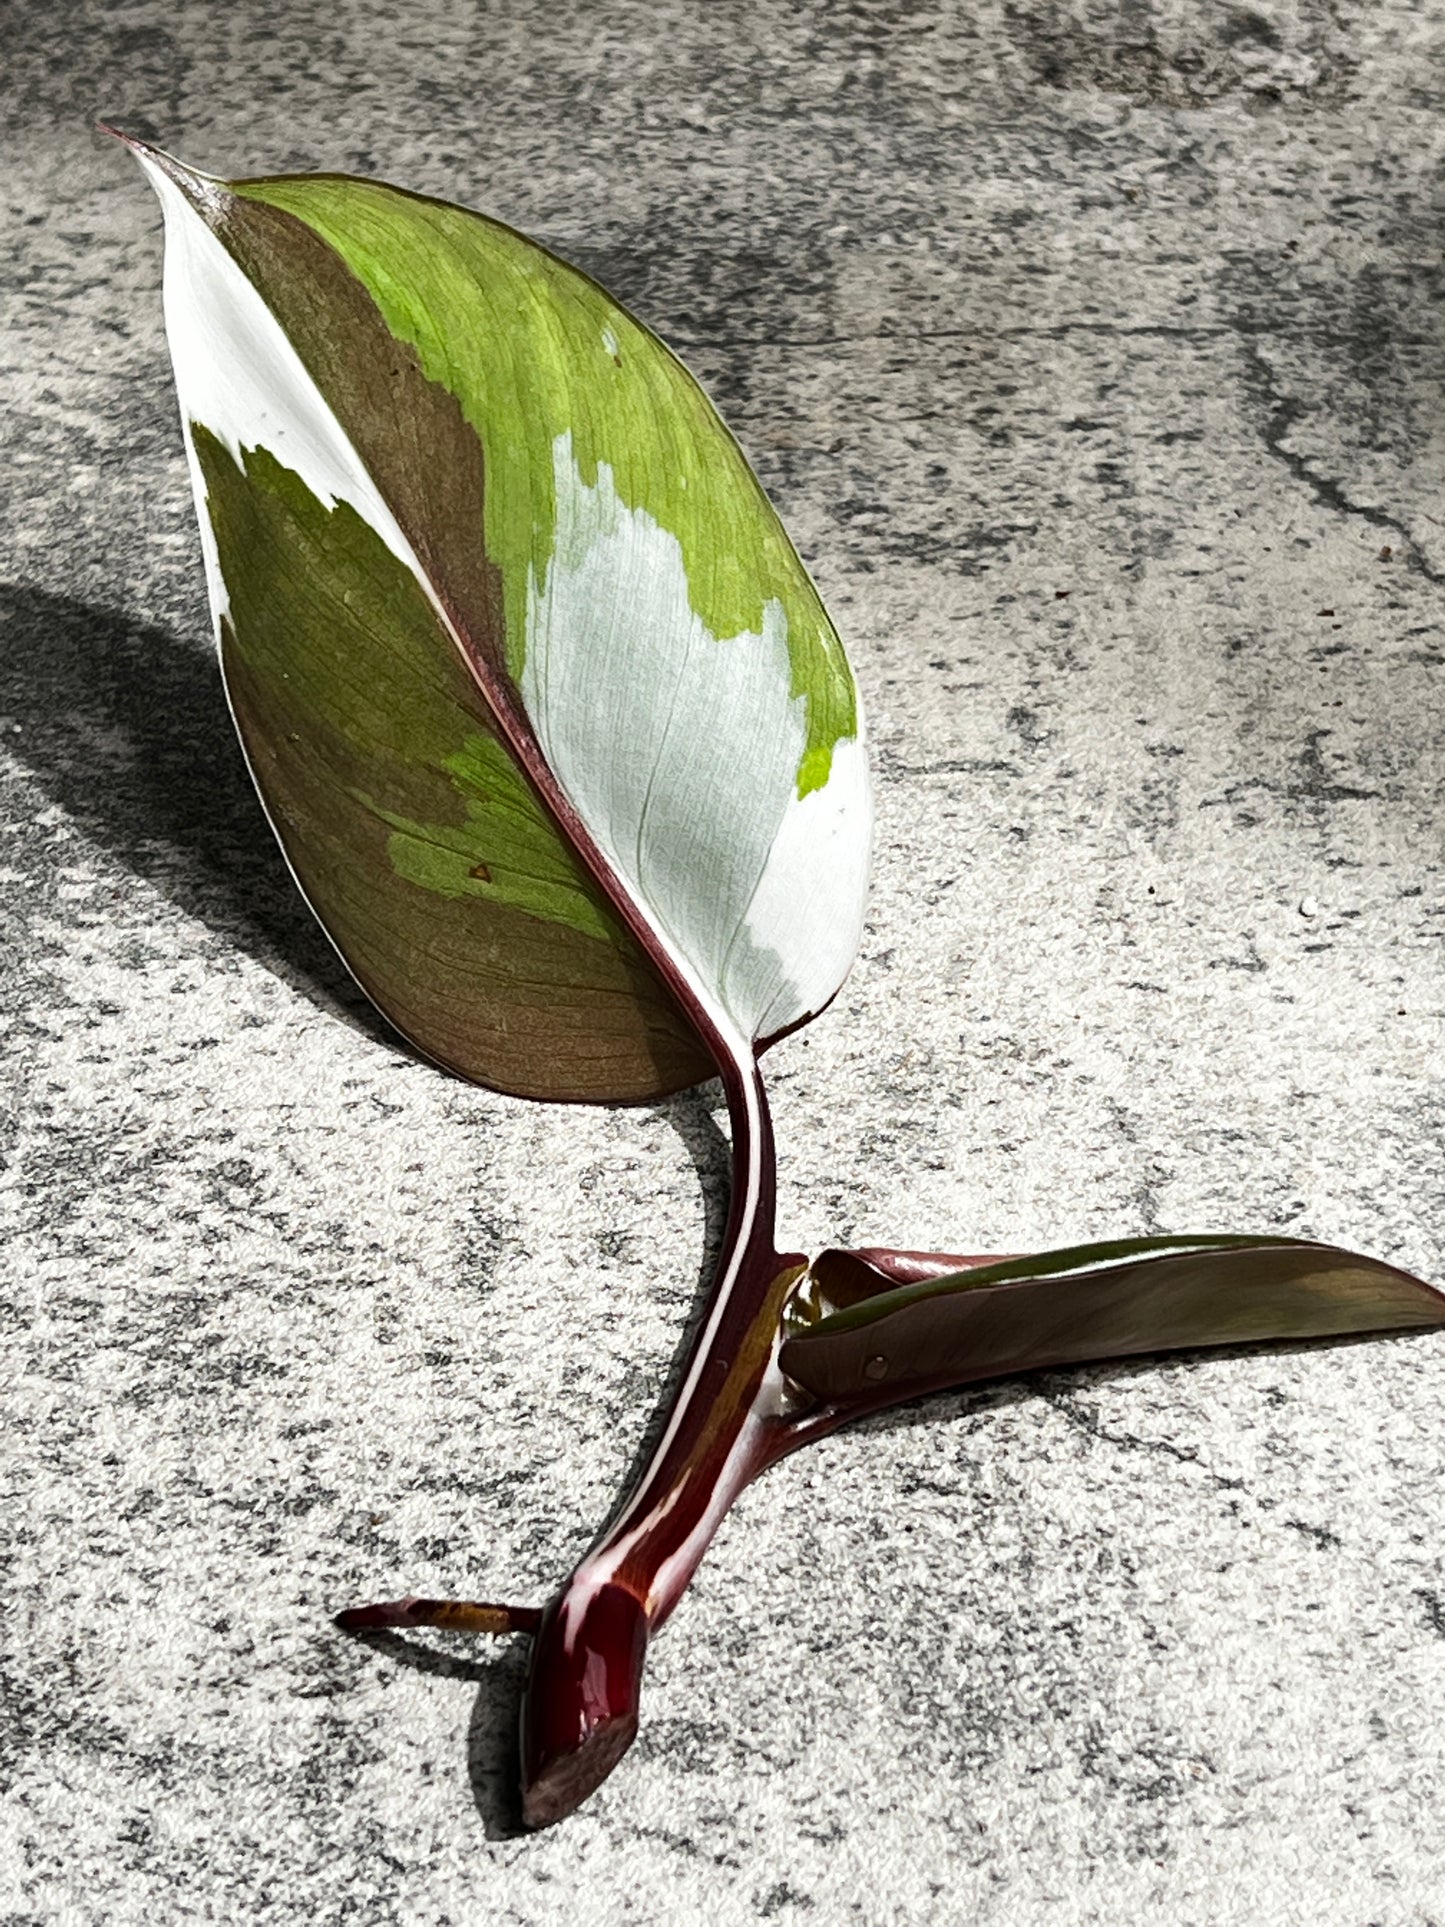 Philodendron white knight tricolor rooting  2 leaves  highly Variegated